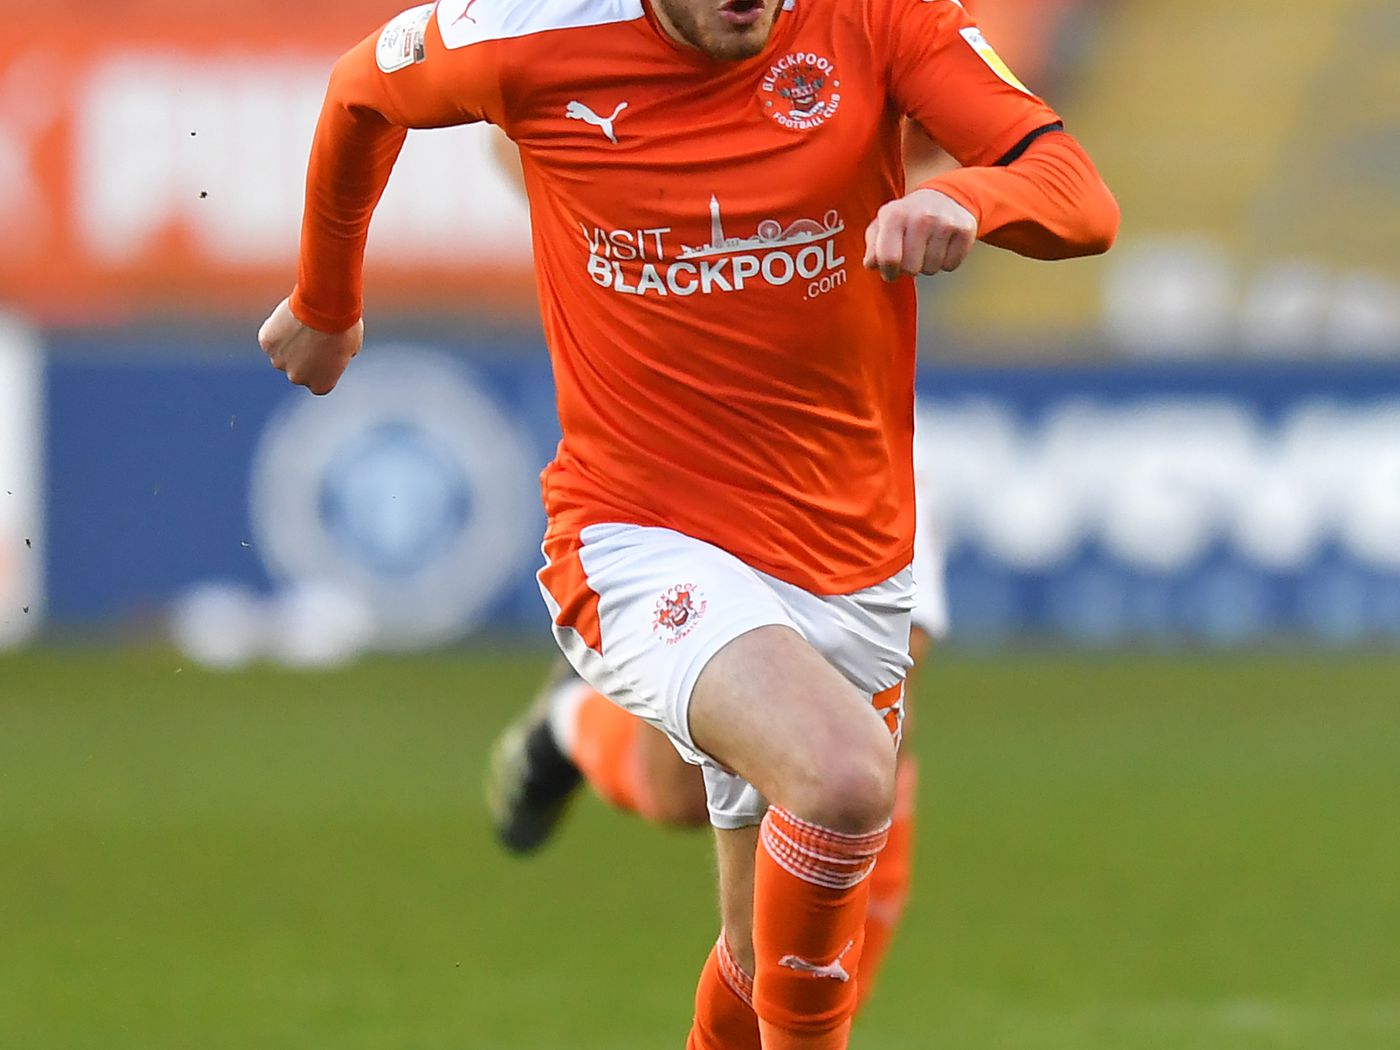 Excellent Embleton will be a miss v Sunderland's what Blackpool fans think of him